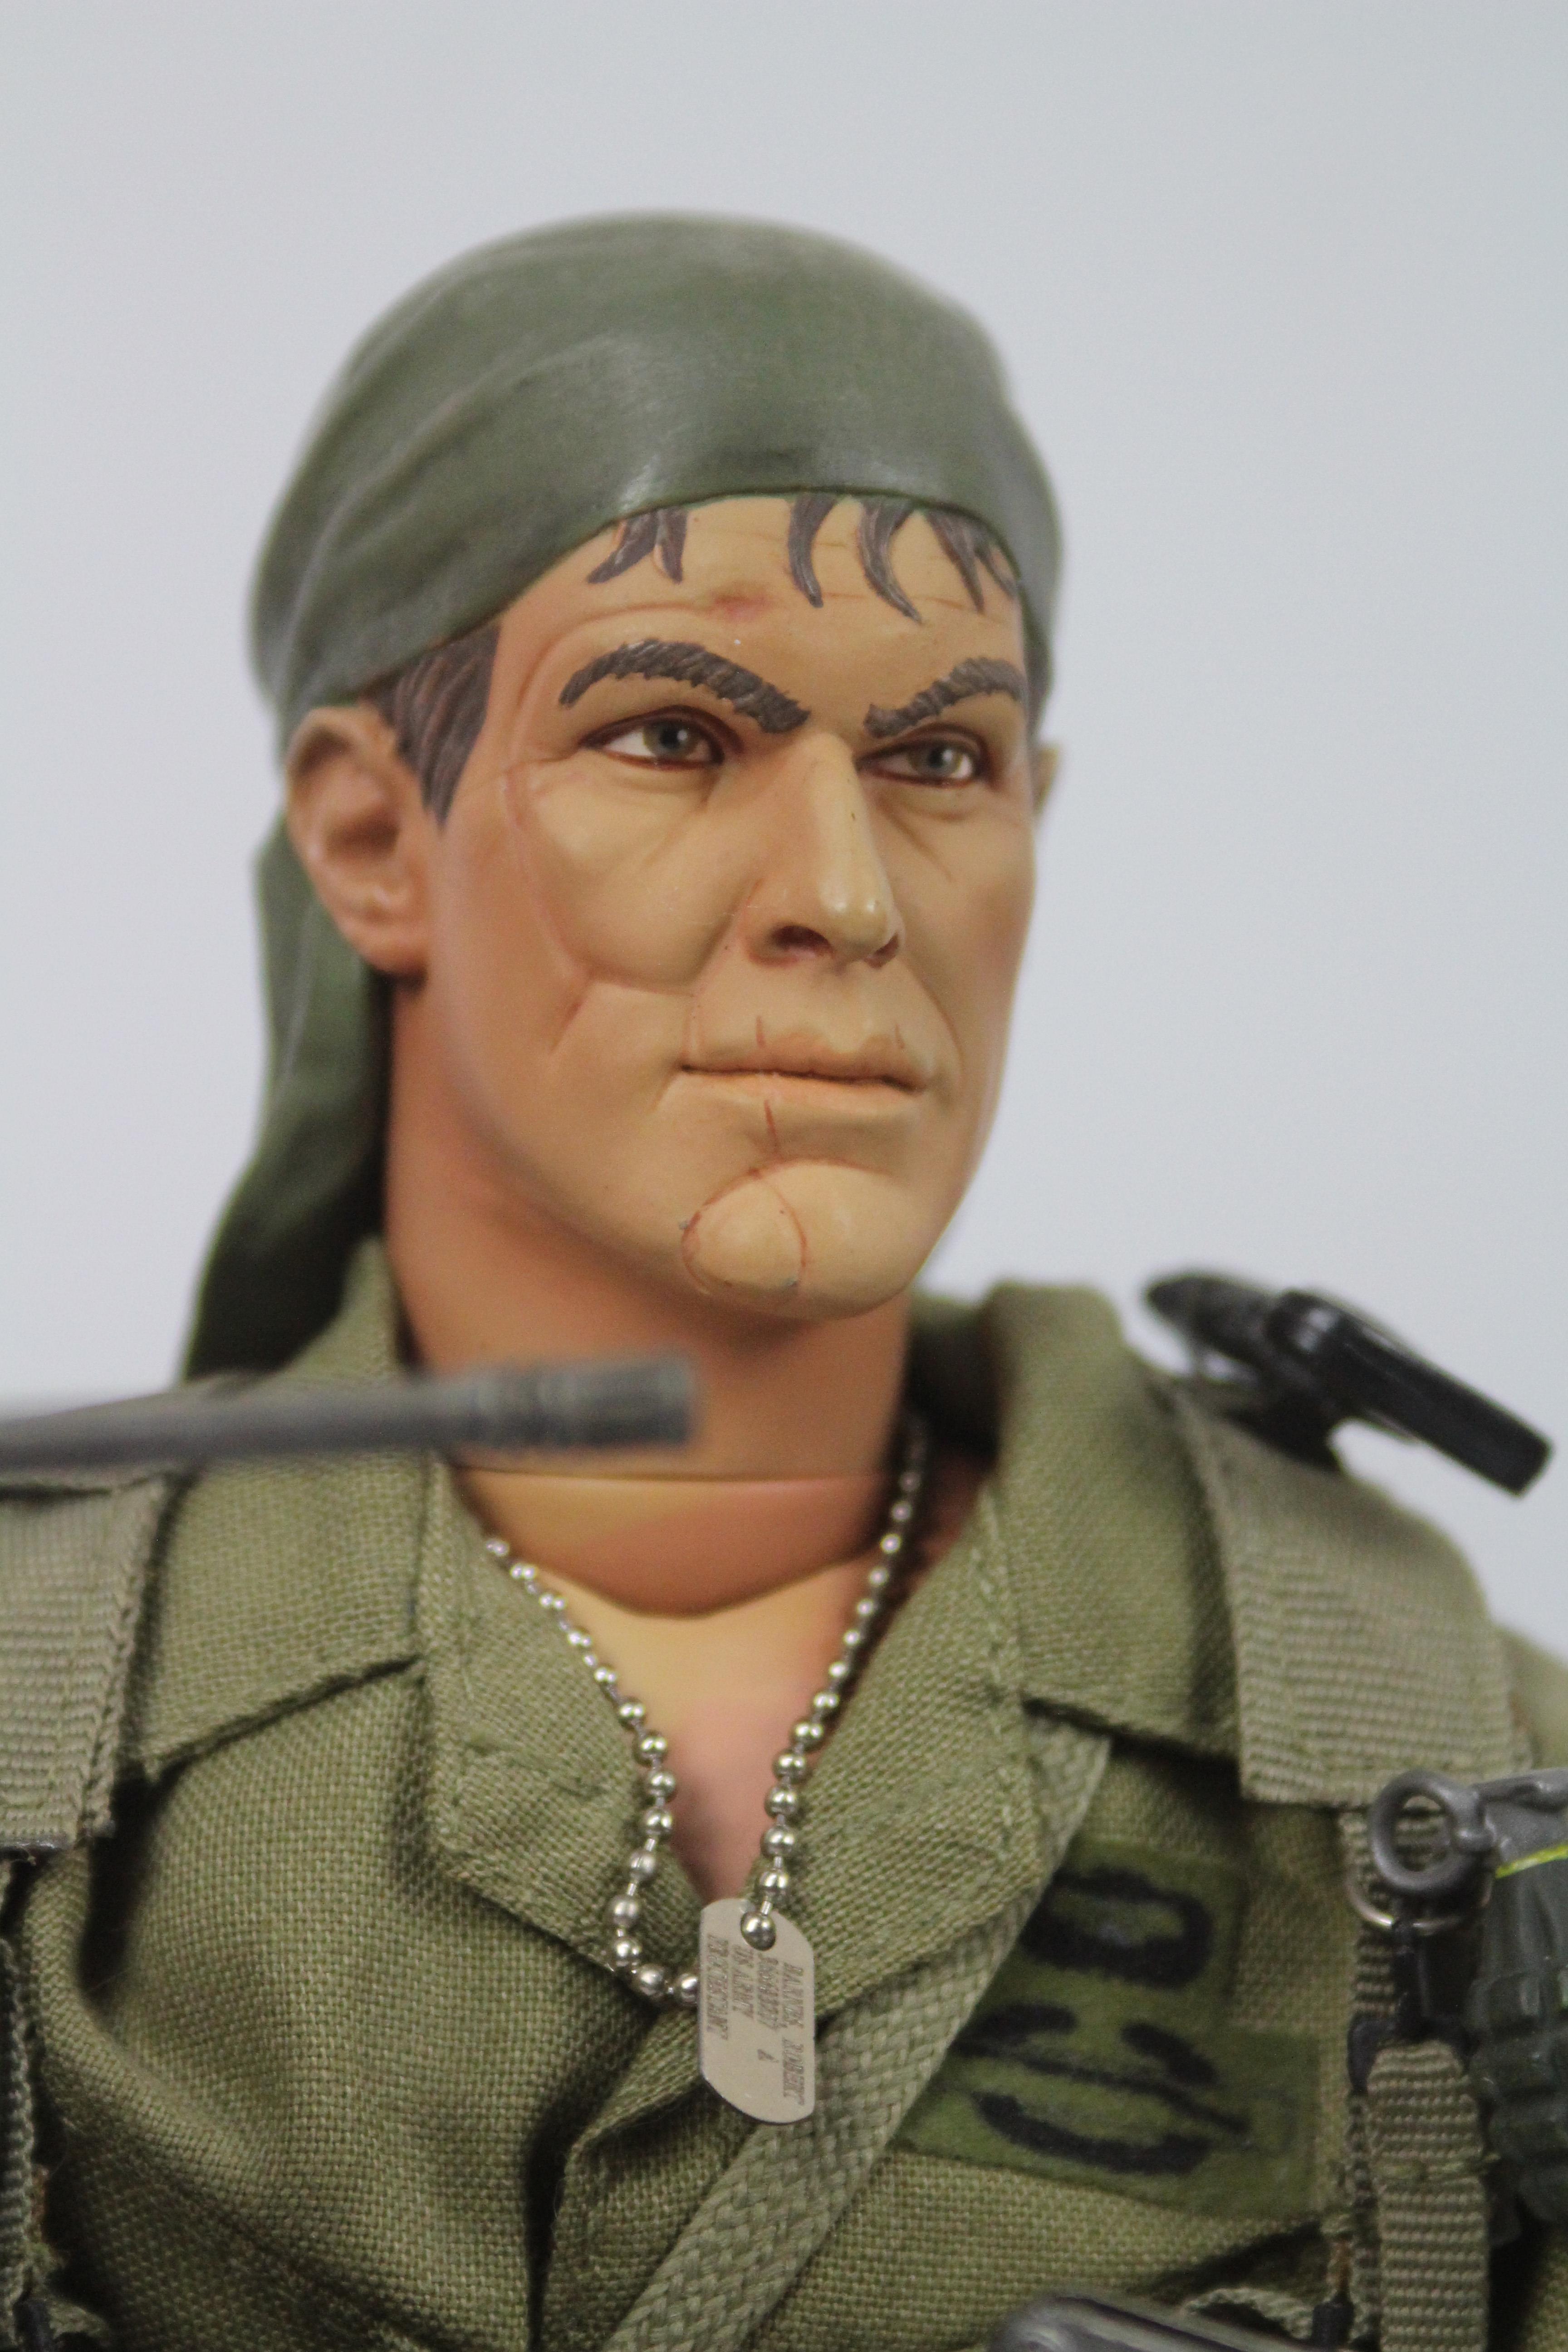 Sideshow Collectibles - Three unboxed 1:6 scale action figures from Sideshows 'Platoon' series, - Image 6 of 8